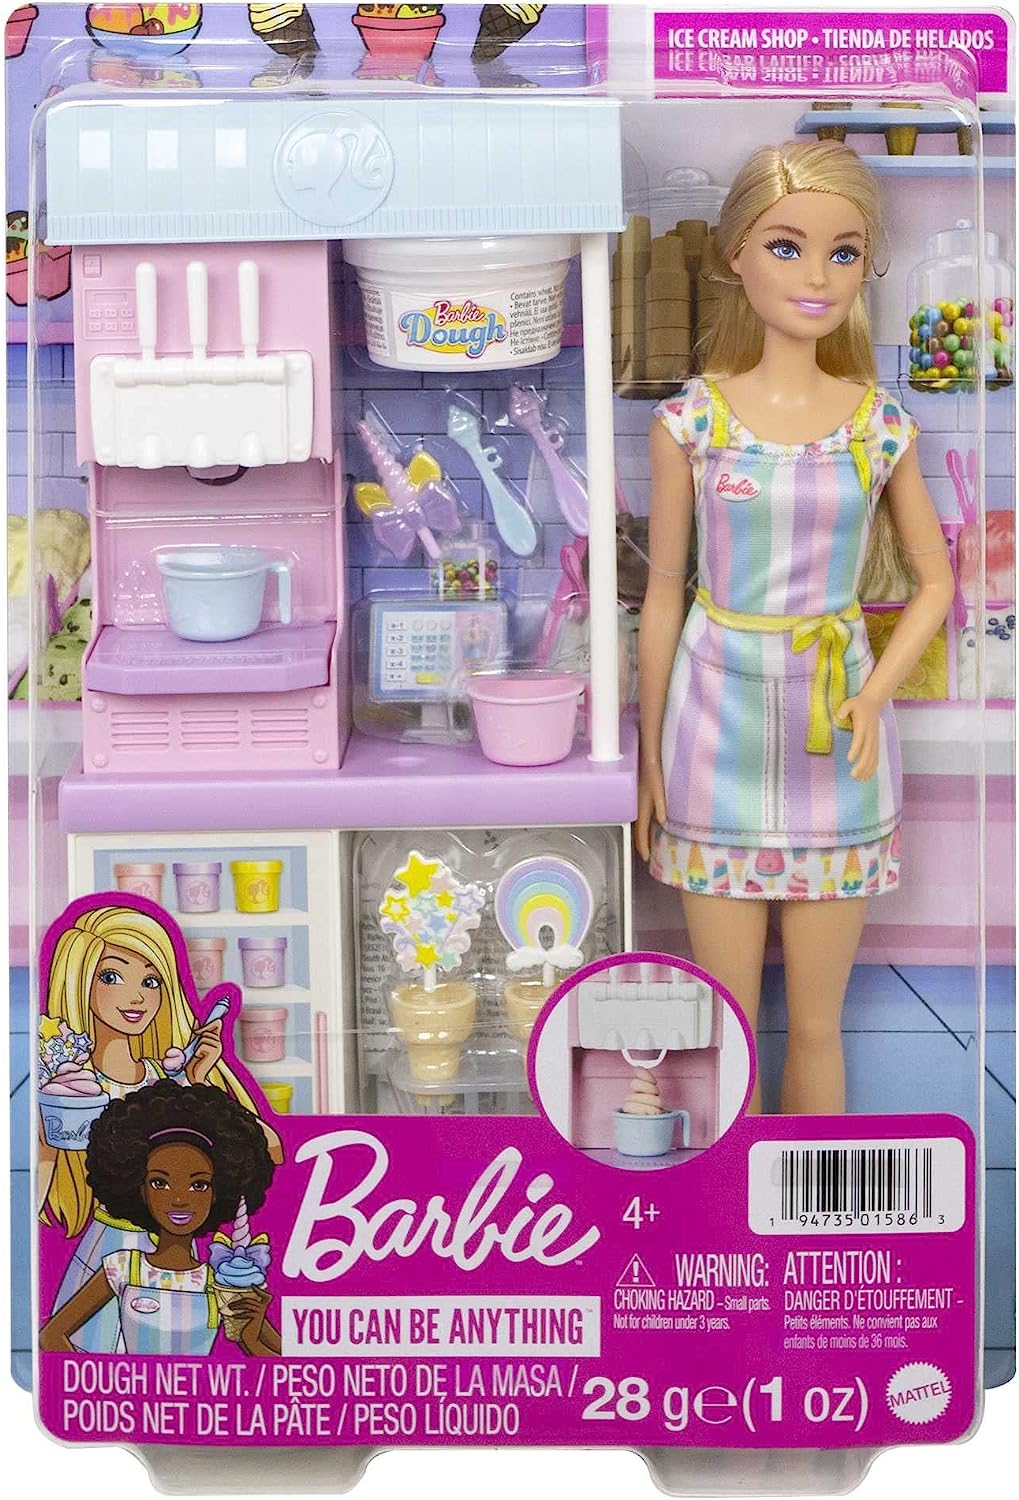 Barbie Careers Doll & Accessories, Ice Cream Shop Playset with Blonde Doll, Ice Cream Machine, Molds, Dough & More